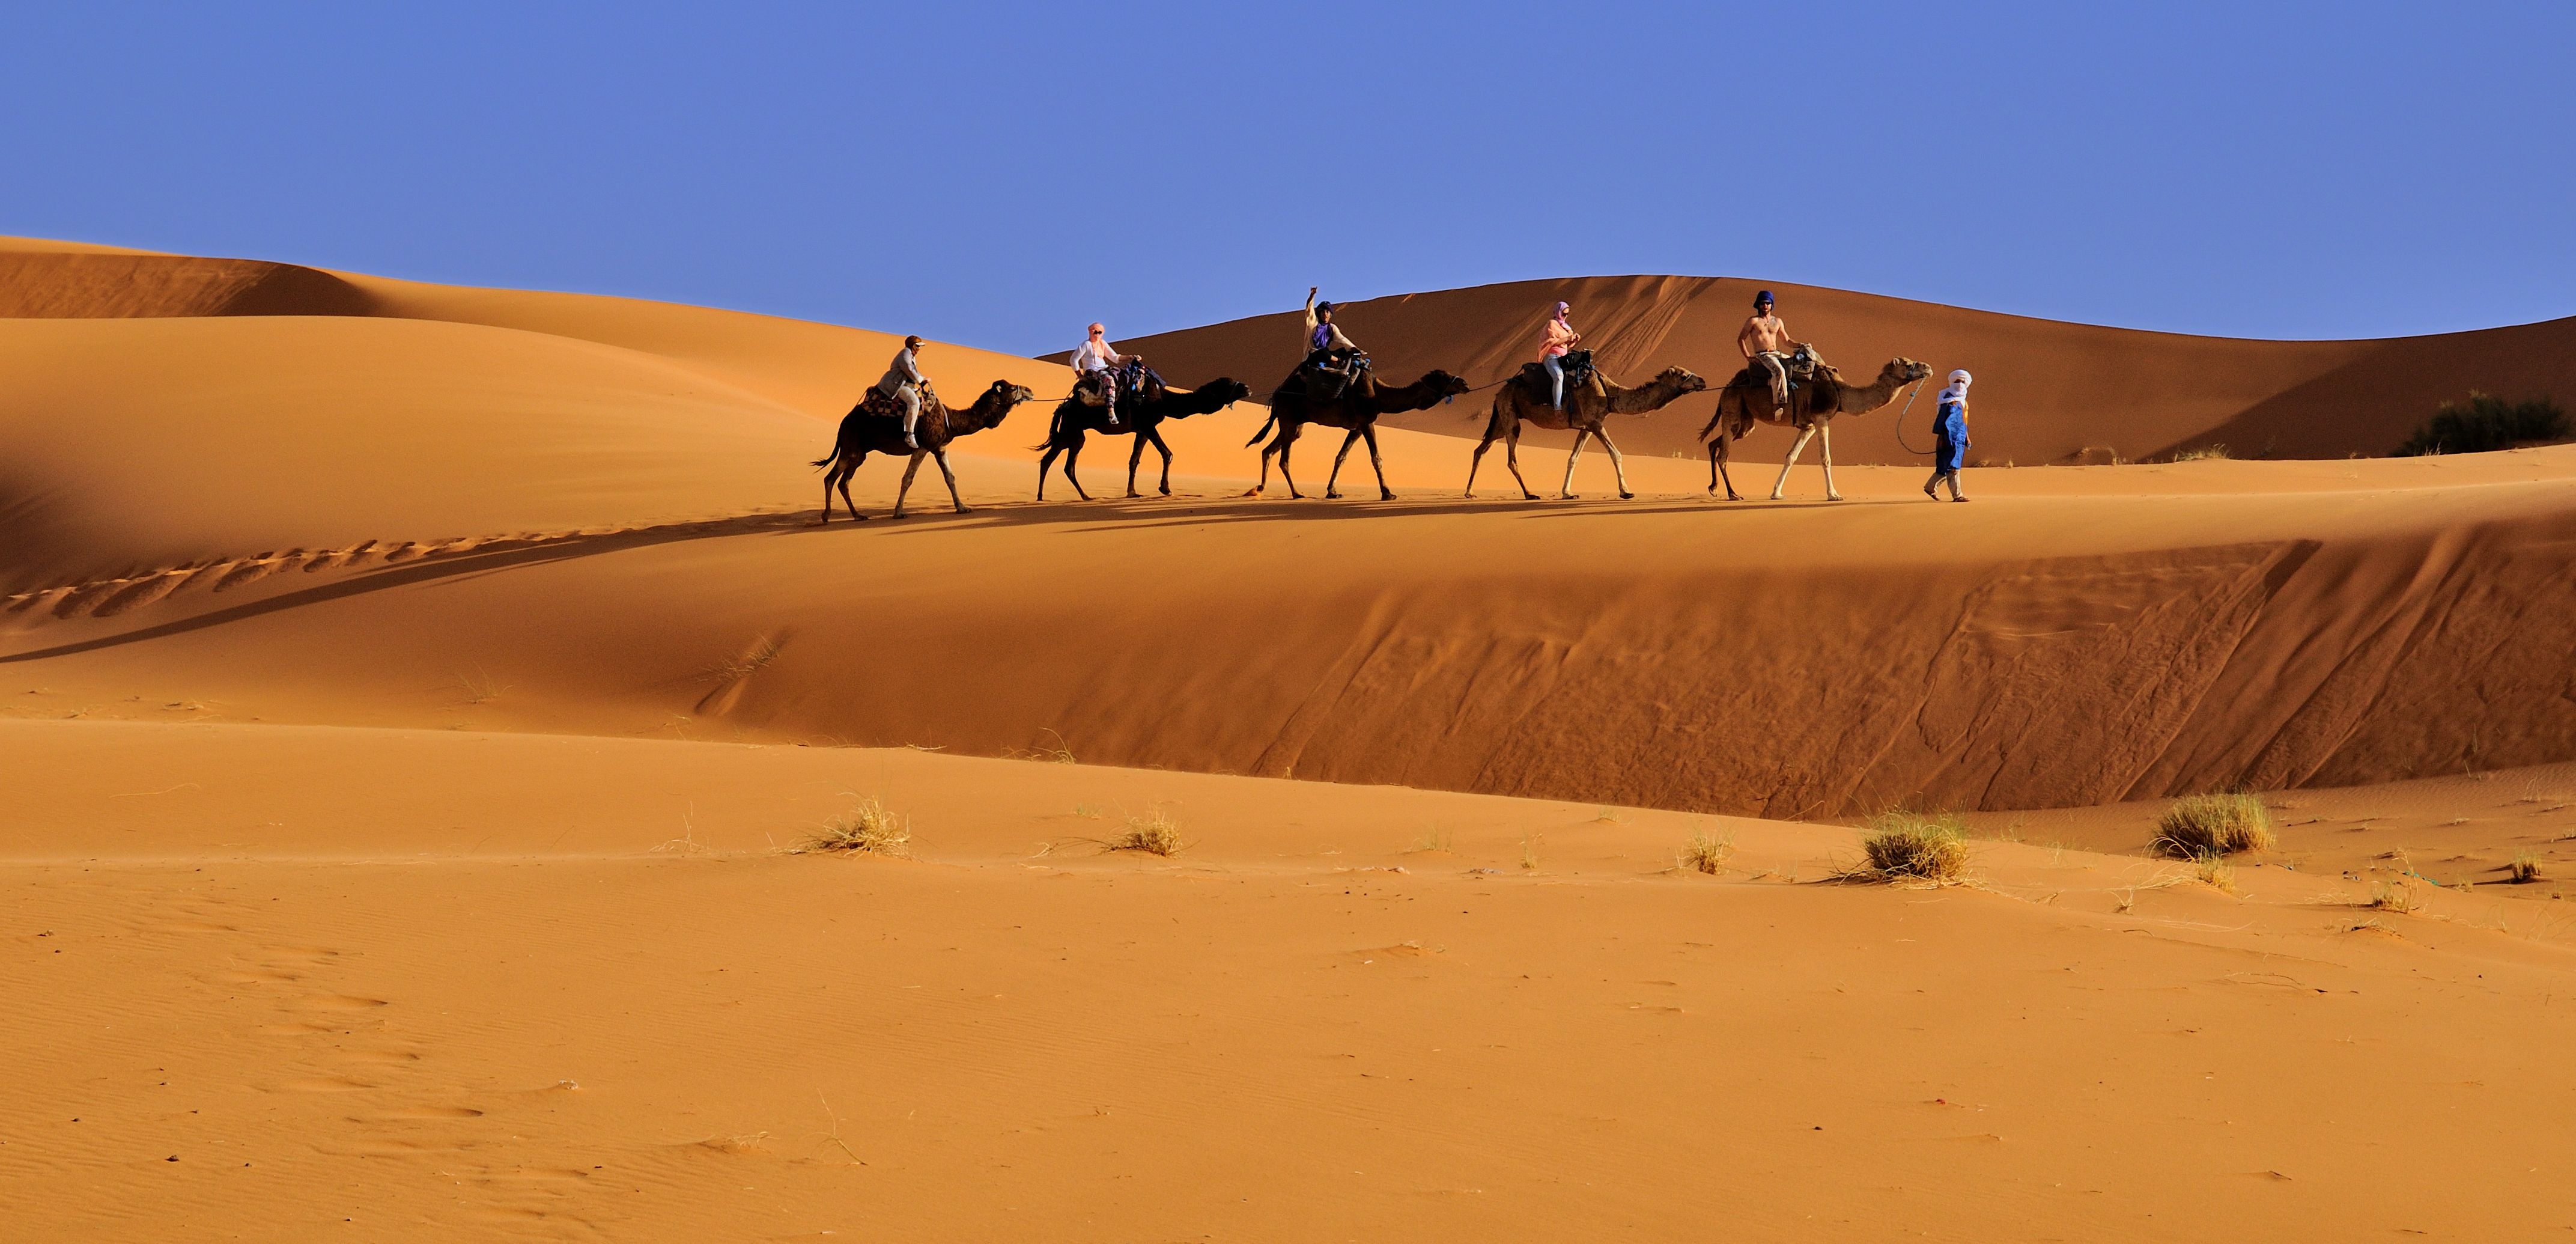 14 days discover Morocco tour from Marrakech to visit the highlights of Morocco